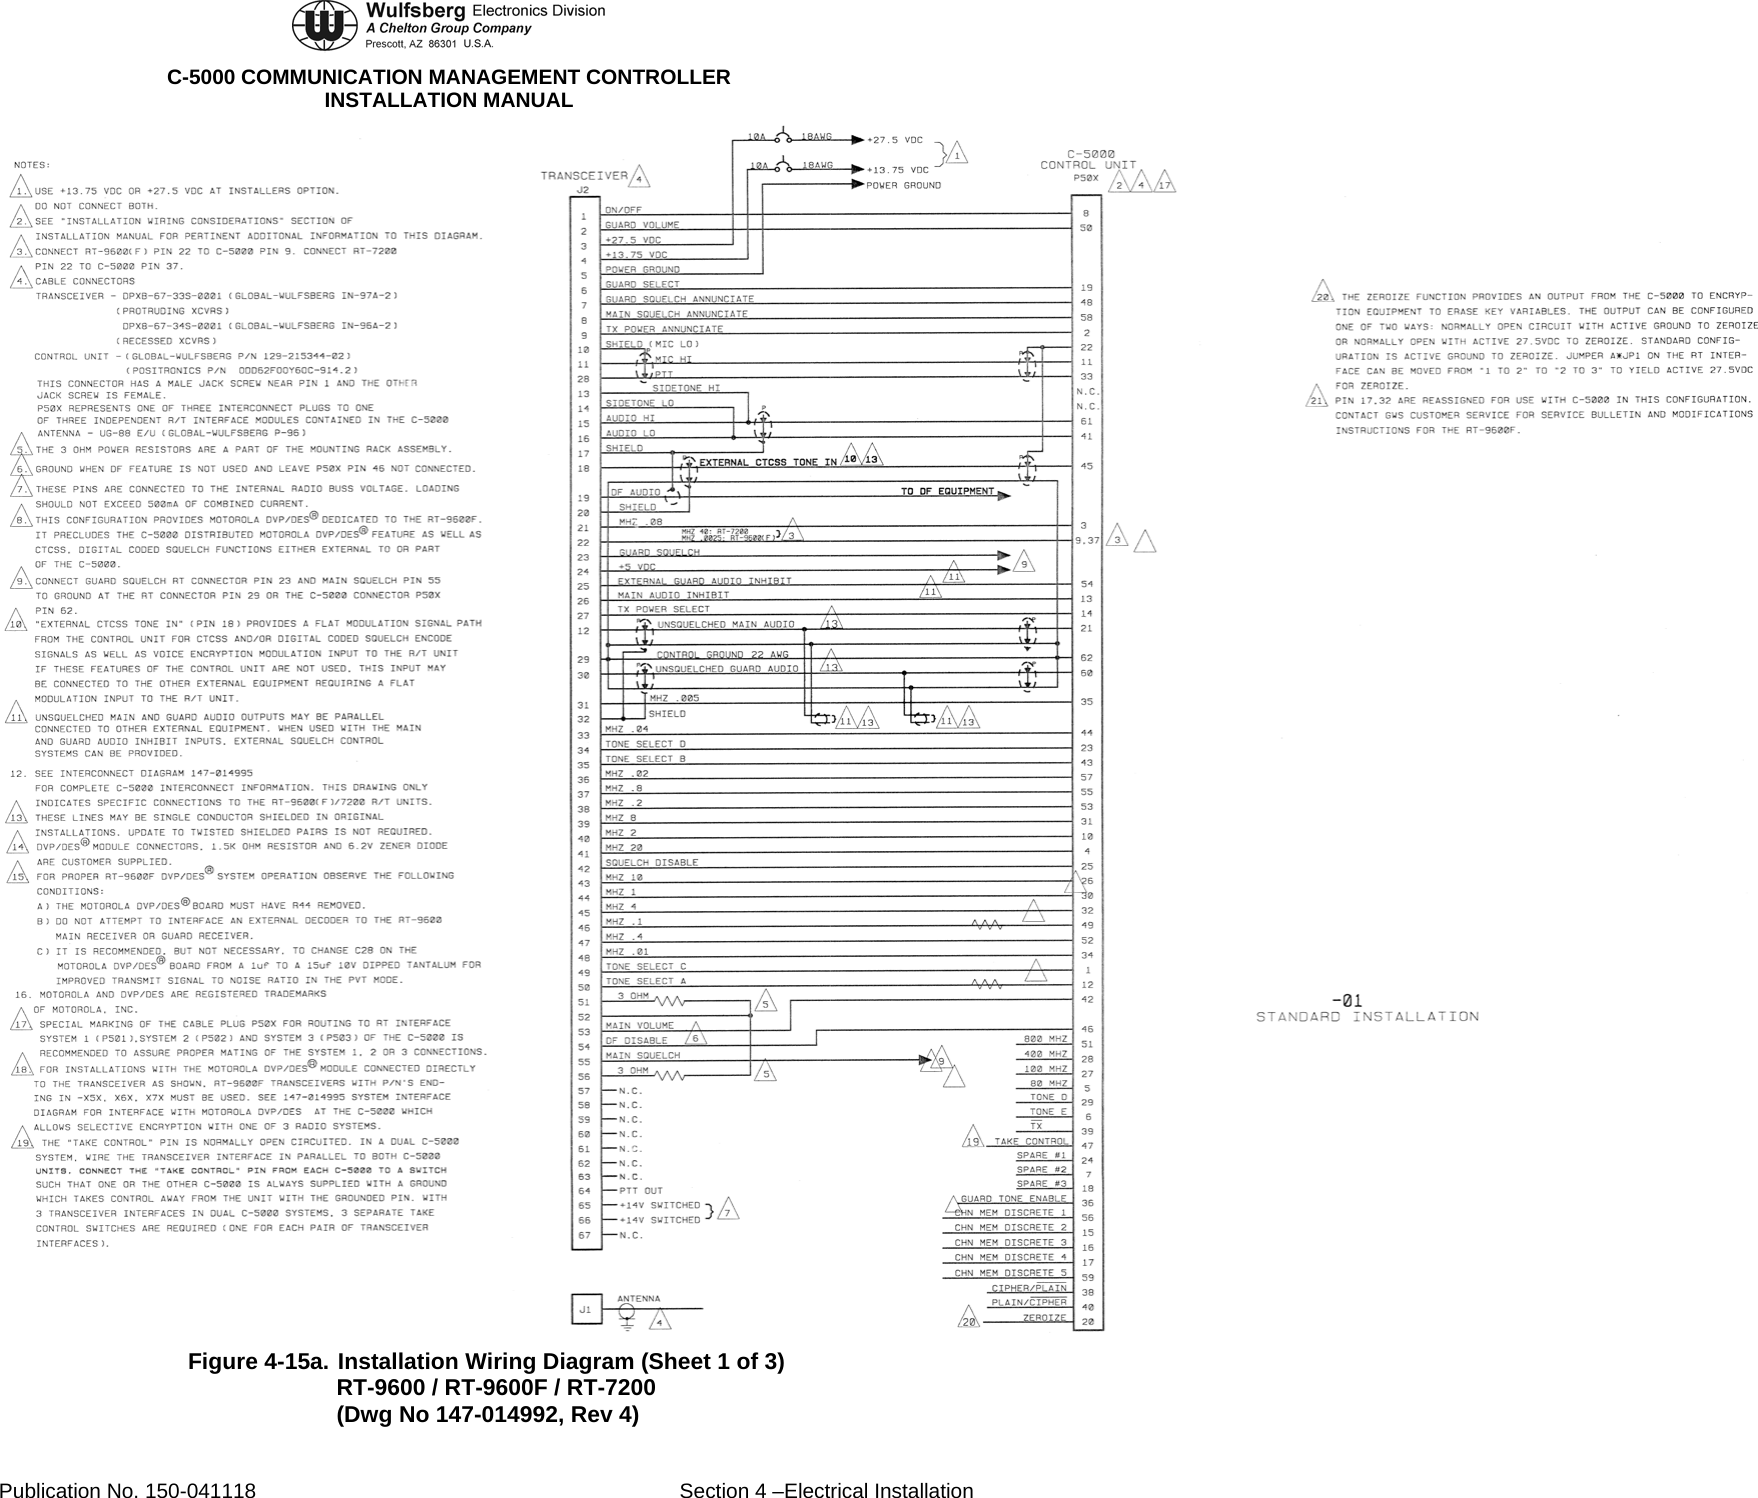  C-5000 COMMUNICATION MANAGEMENT CONTROLLER INSTALLATION MANUAL  Figure 4-15a. Installation Wiring Diagram (Sheet 1 of 3) RT-9600 / RT-9600F / RT-7200 (Dwg No 147-014992, Rev 4) Publication No. 150-041118  Section 4 –Electrical Installation 